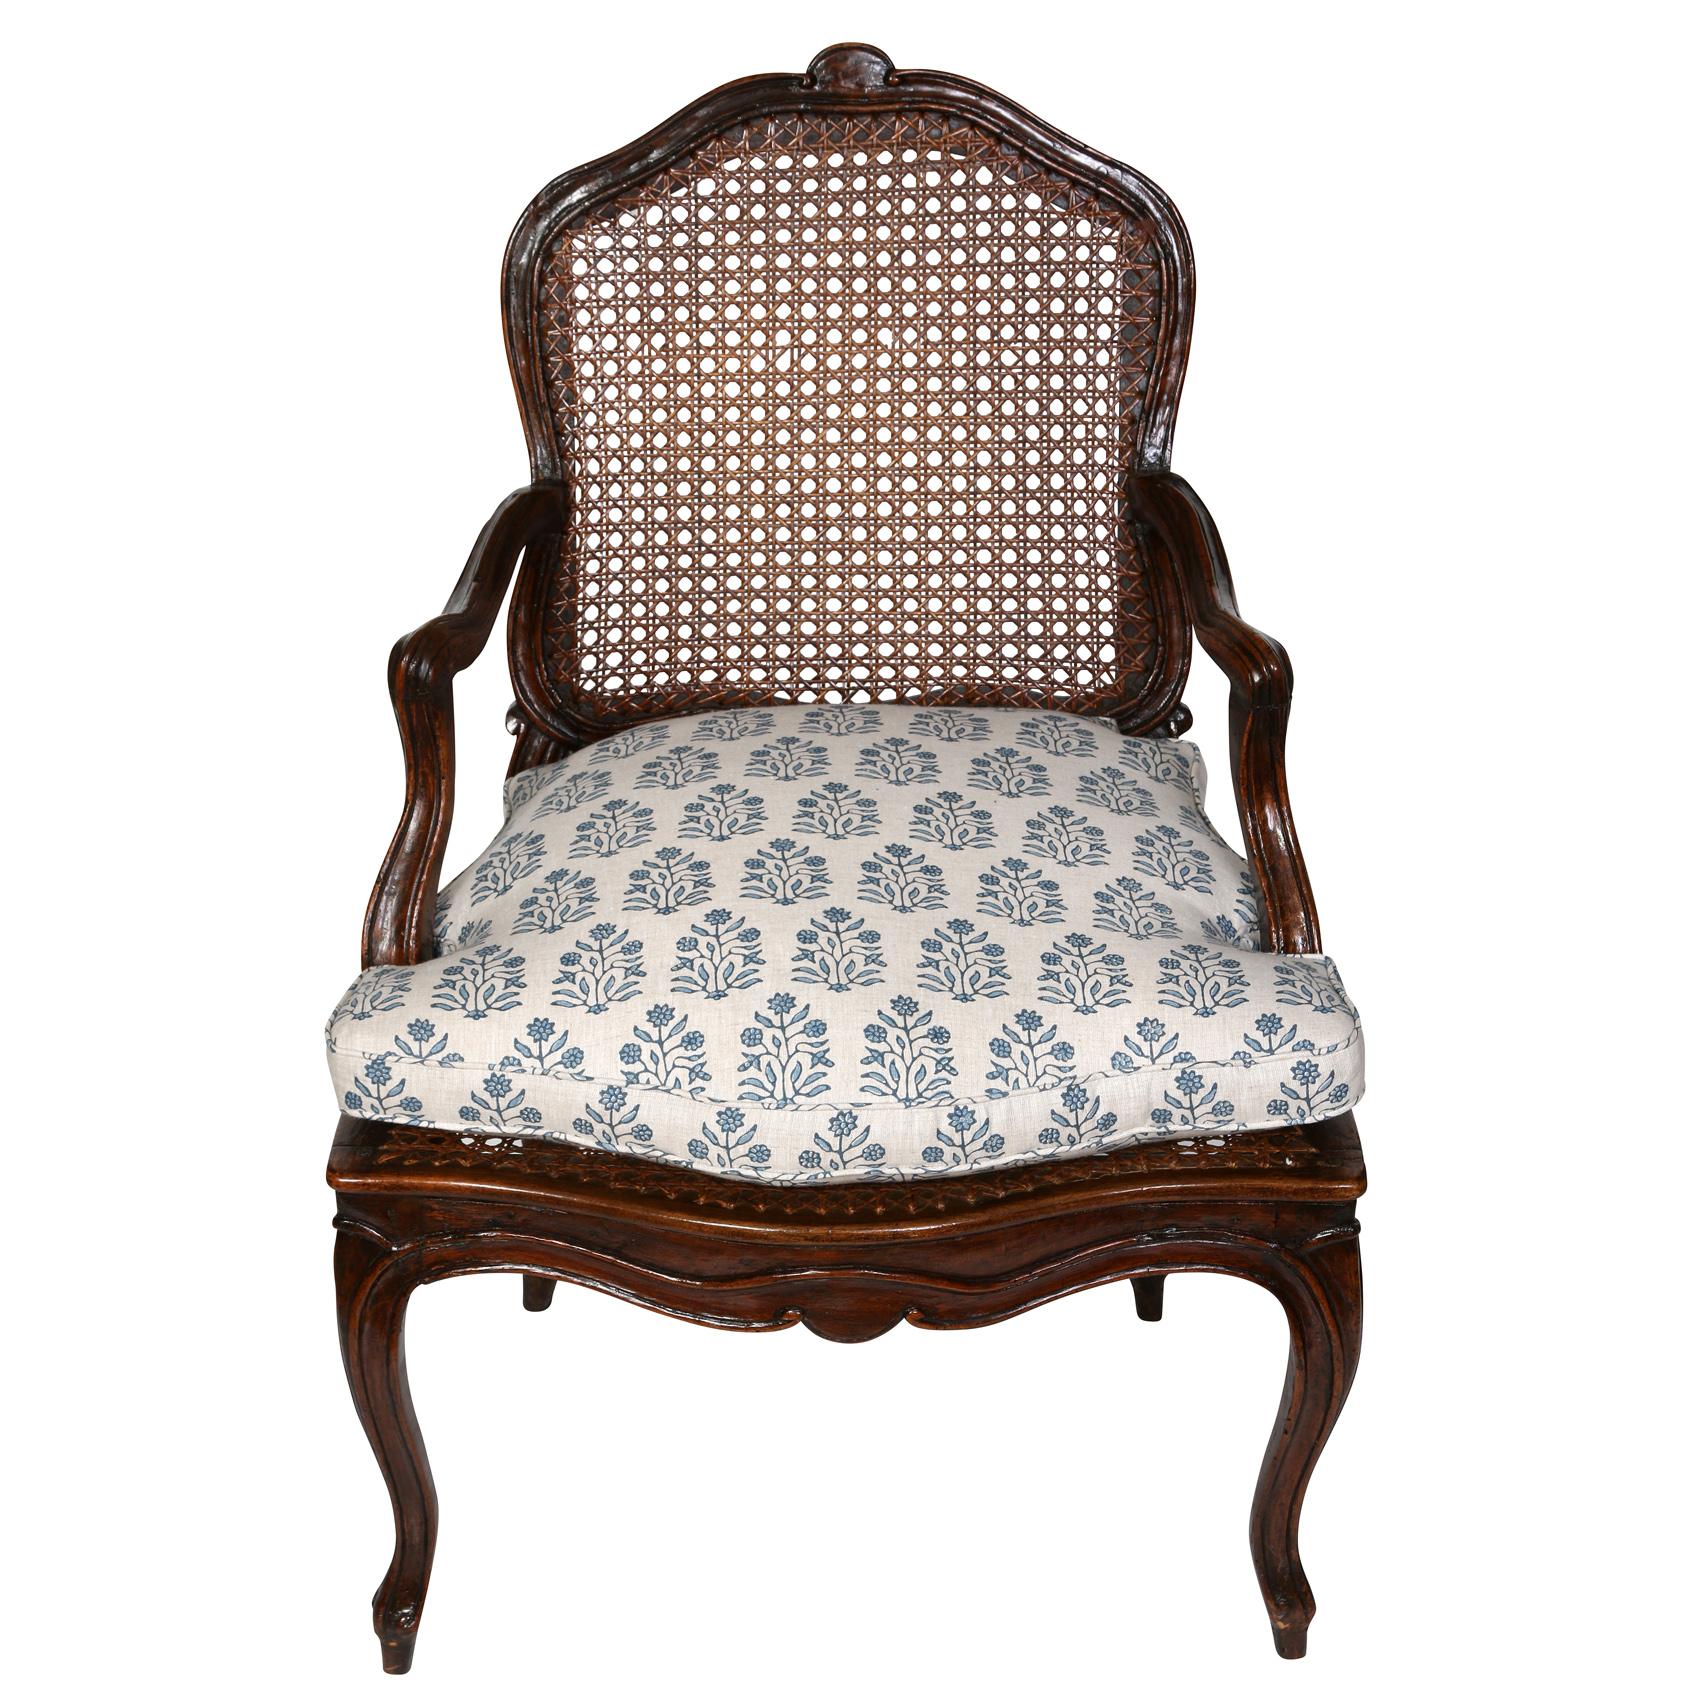 This charming little walnut arm chair has a caned seat and back, with cabriole legs and a lovely Walter G linen cushion--perfect as a side or desk chair. 